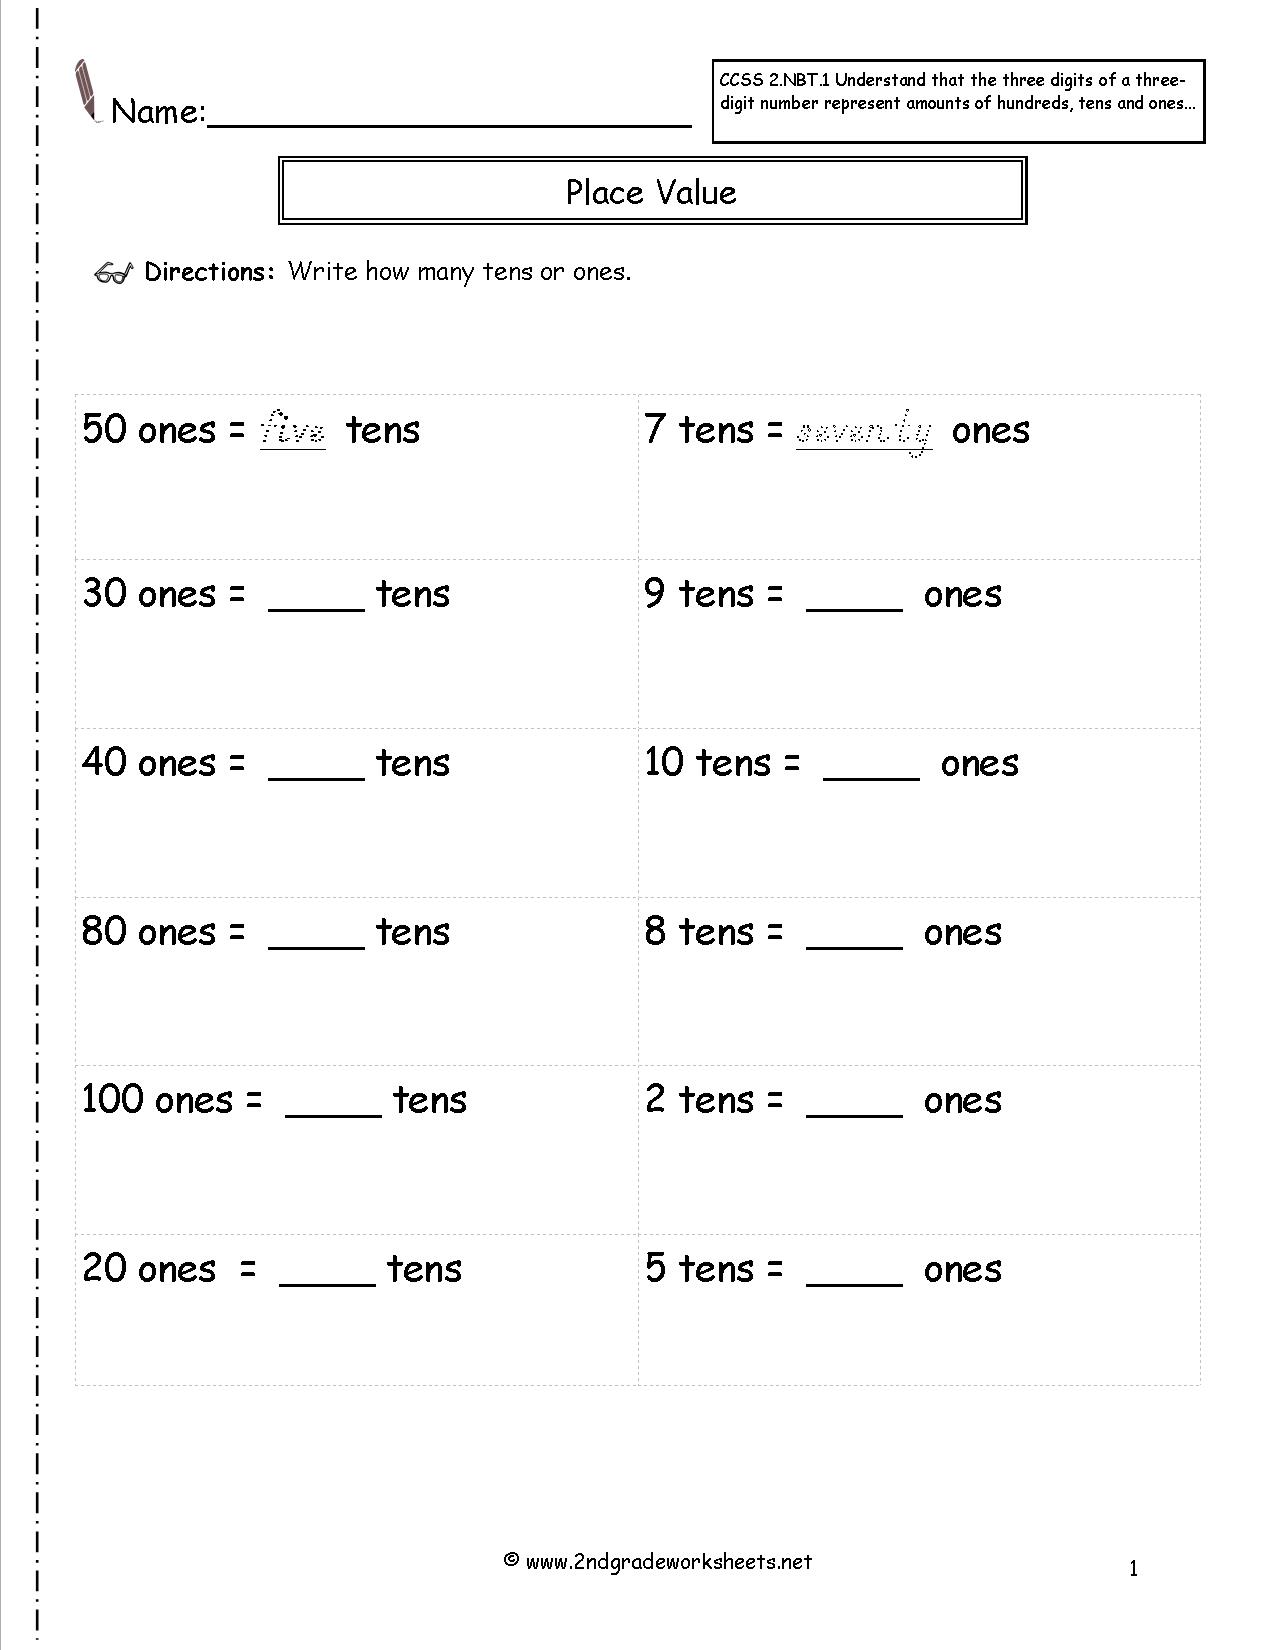 15-best-images-of-place-value-tens-ones-worksheet-place-value